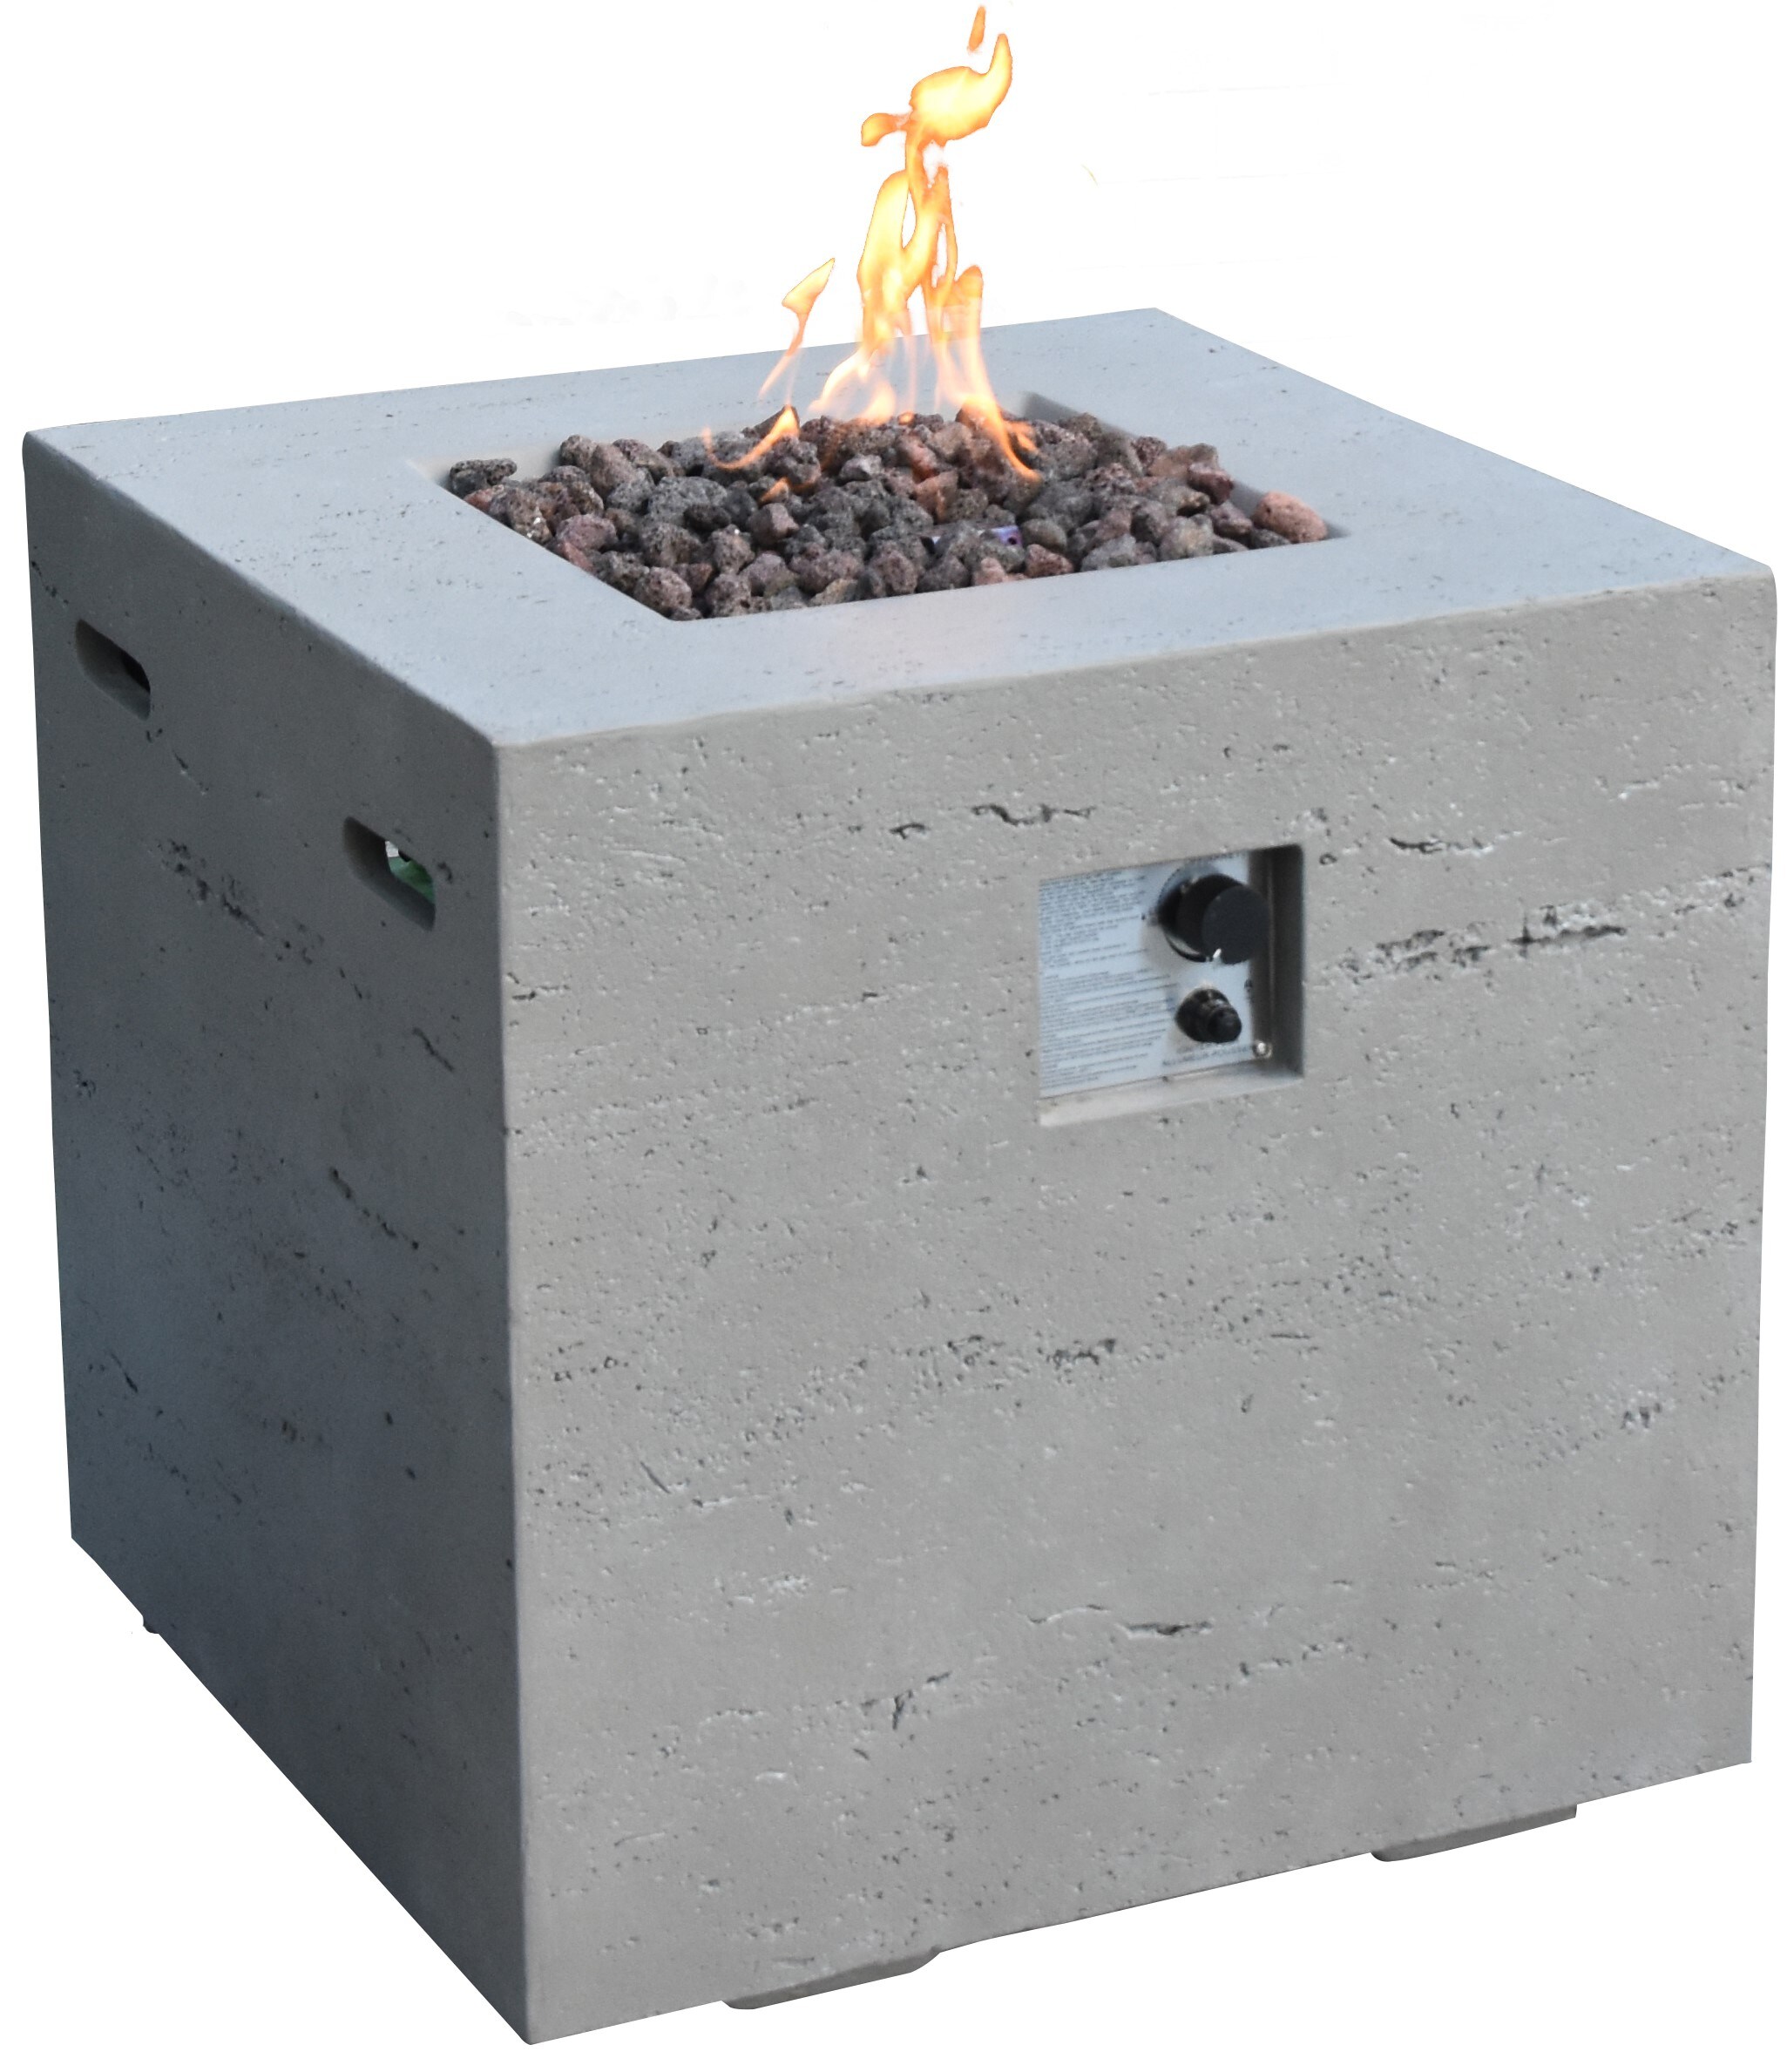 Propane Gas Fire Pit, Propane Tank Distance From Fire Pit